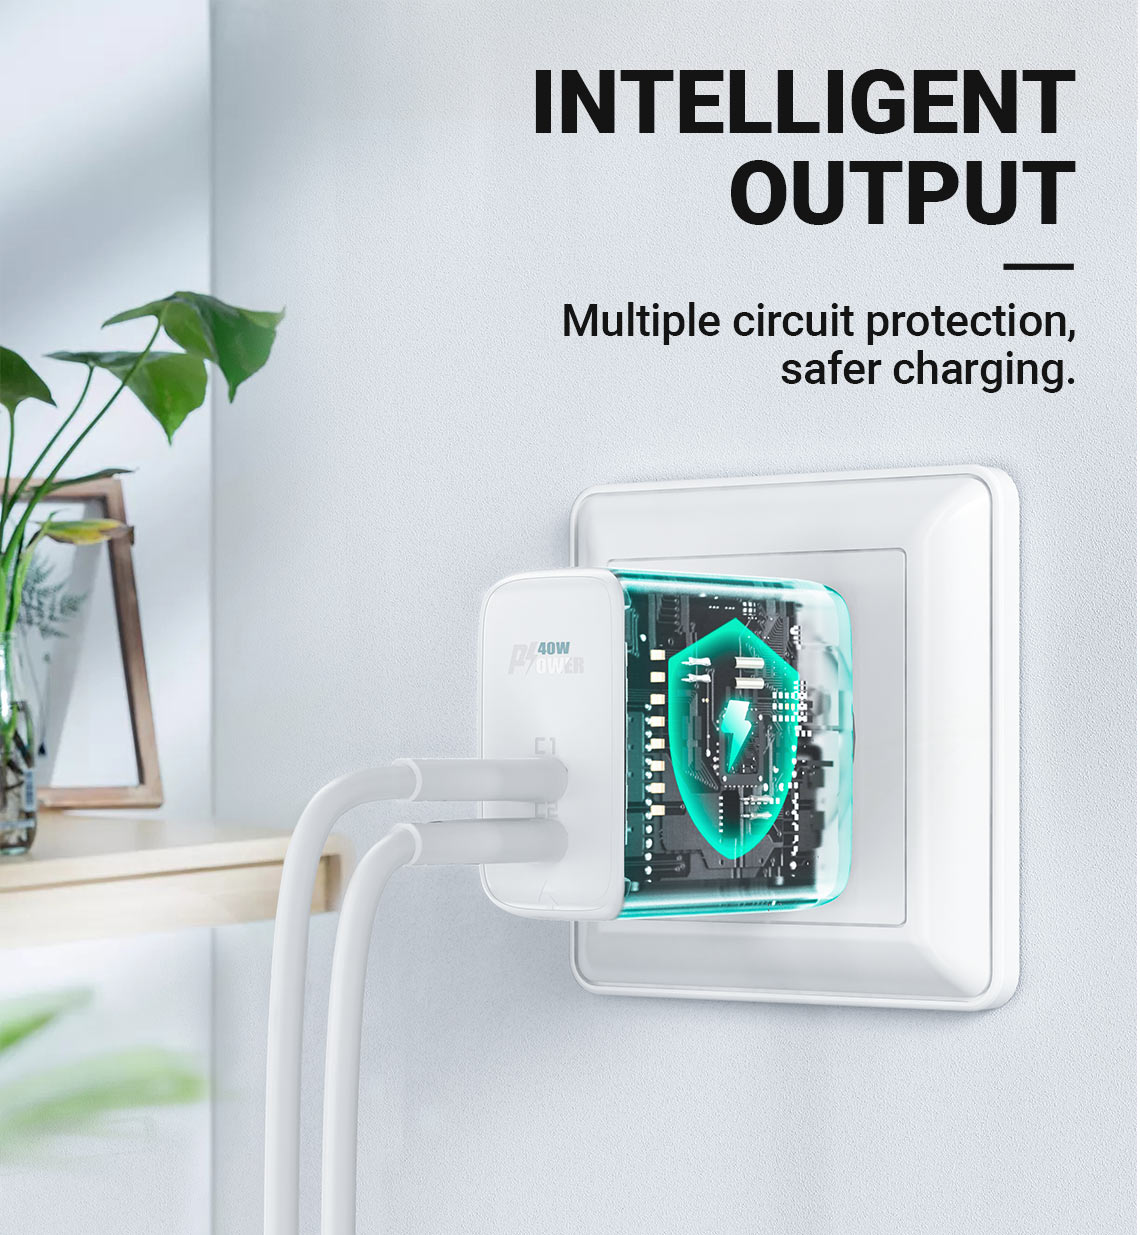 acefast a11 wall charger intelligent output